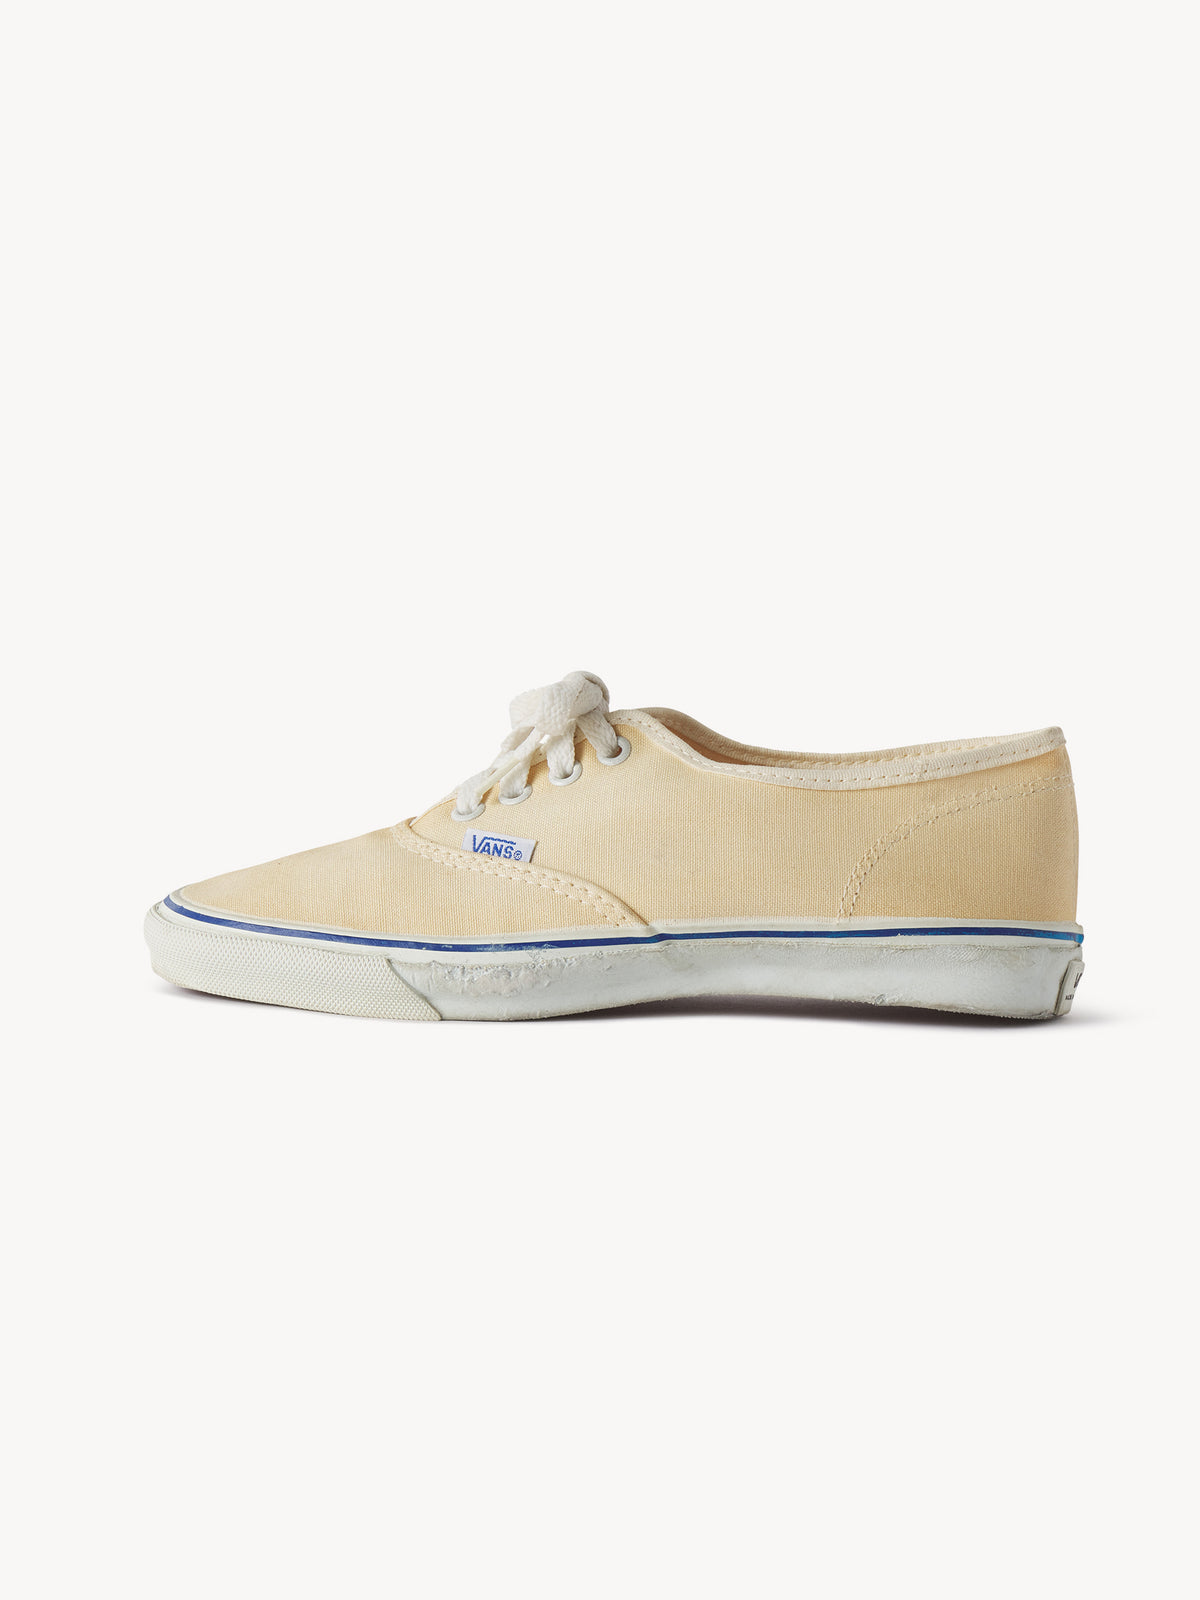 Made in USA Vans Authentic Shoes - 0158 - Product Flat